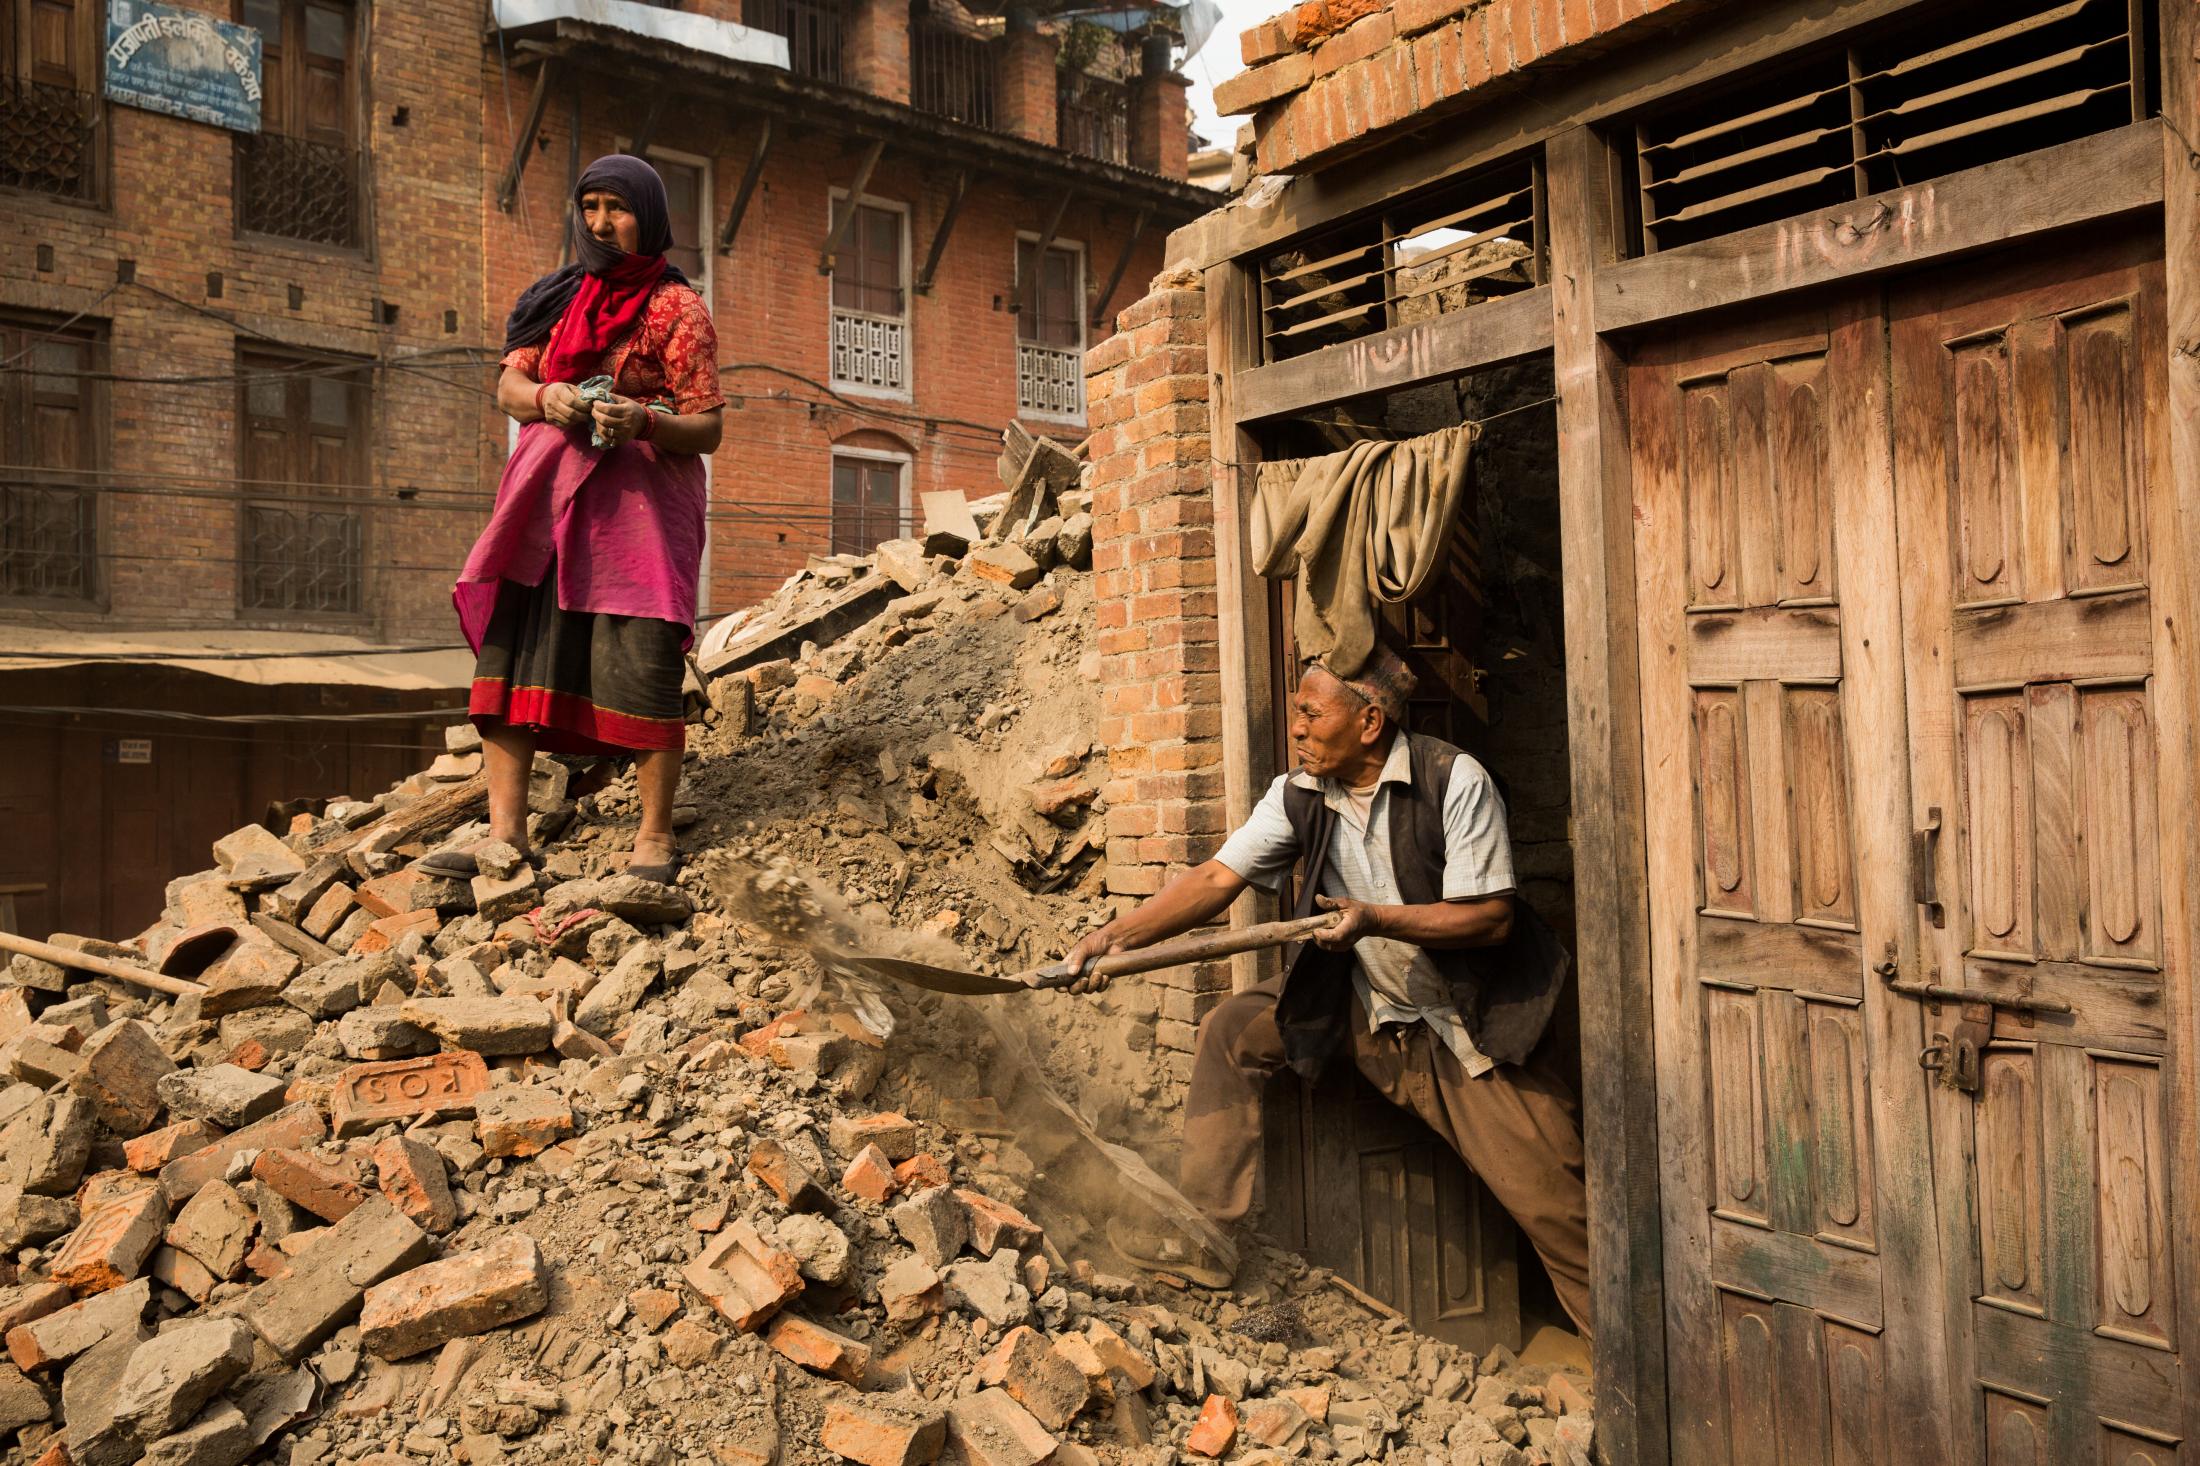 Nepal: A Shattered Country